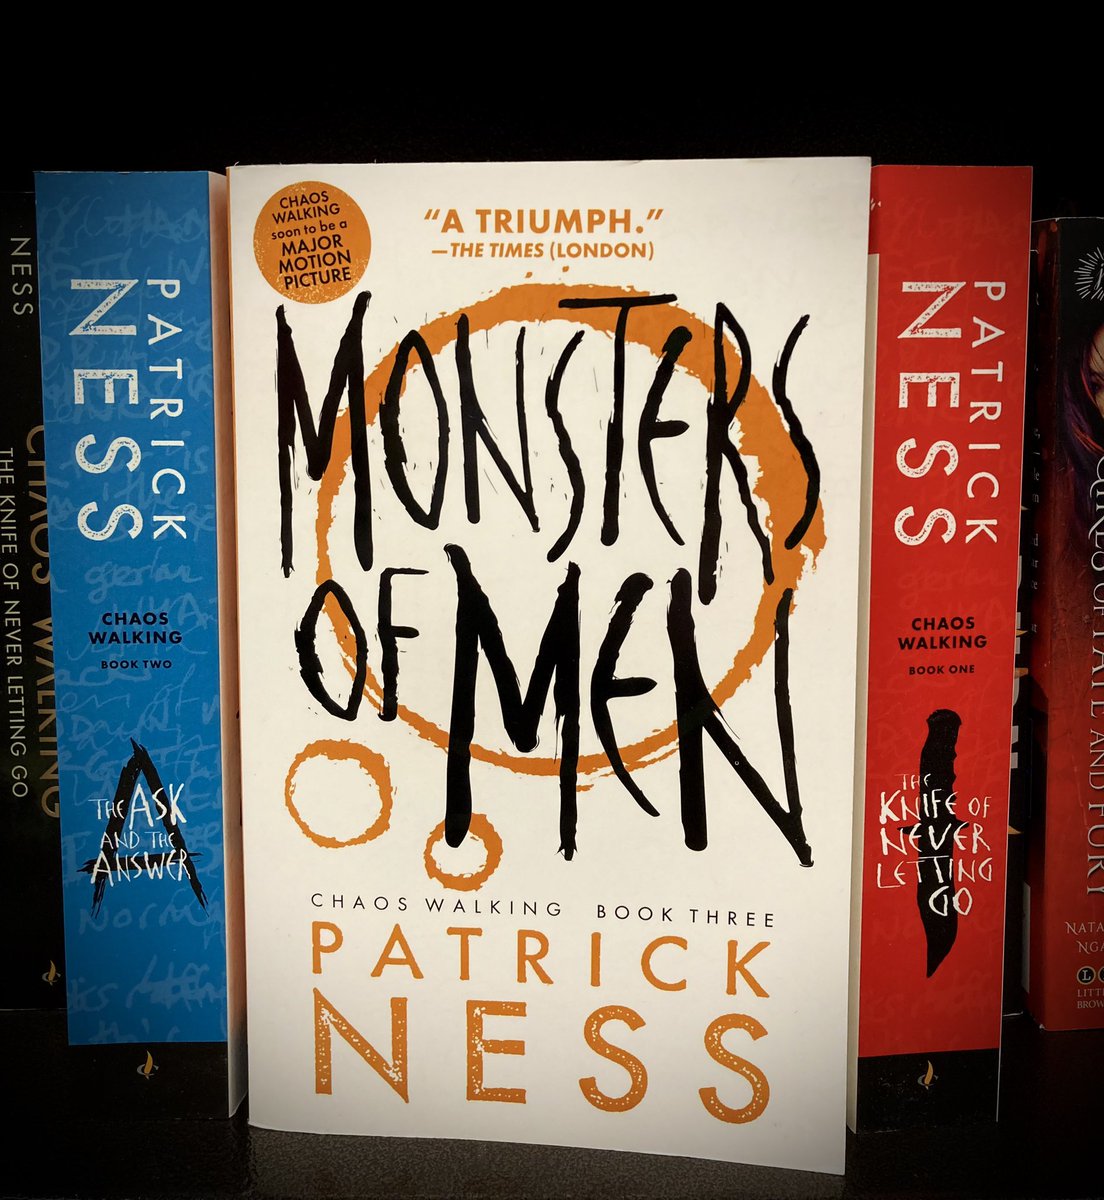 To say you have no choice is to relieve yourself of responsibility.
Patrick Ness, Monsters of Men (Chaos Walking, #3) #bookstagram #bnmacon #barnesandnoble @barnesandnoble @patricknessbooks